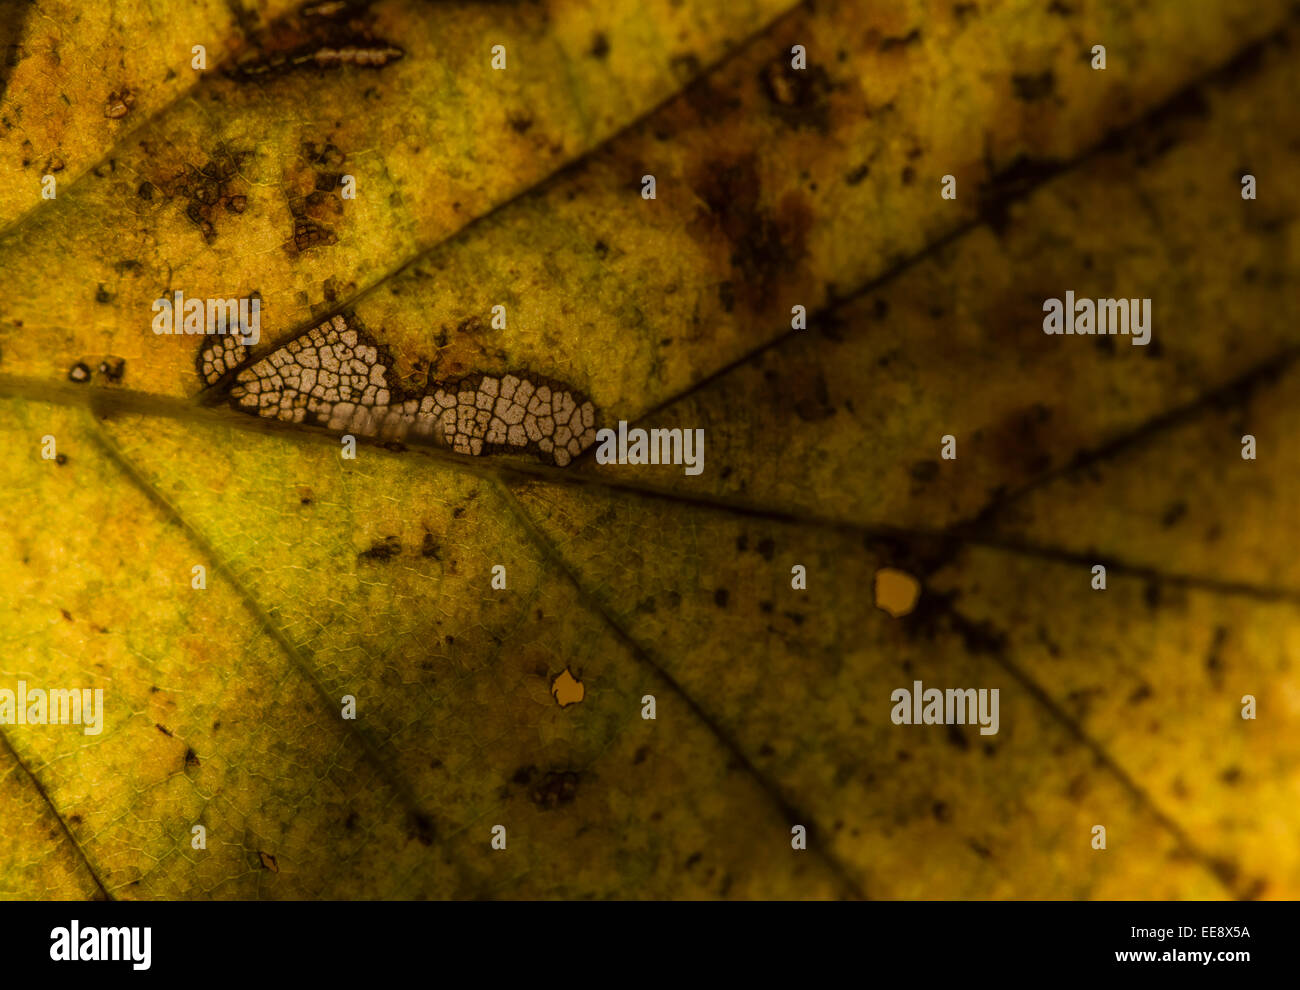 Macro shot of limp beech leaf, backlit, with epidermal cells and traces of a damage caused by pest insects shining through Stock Photo